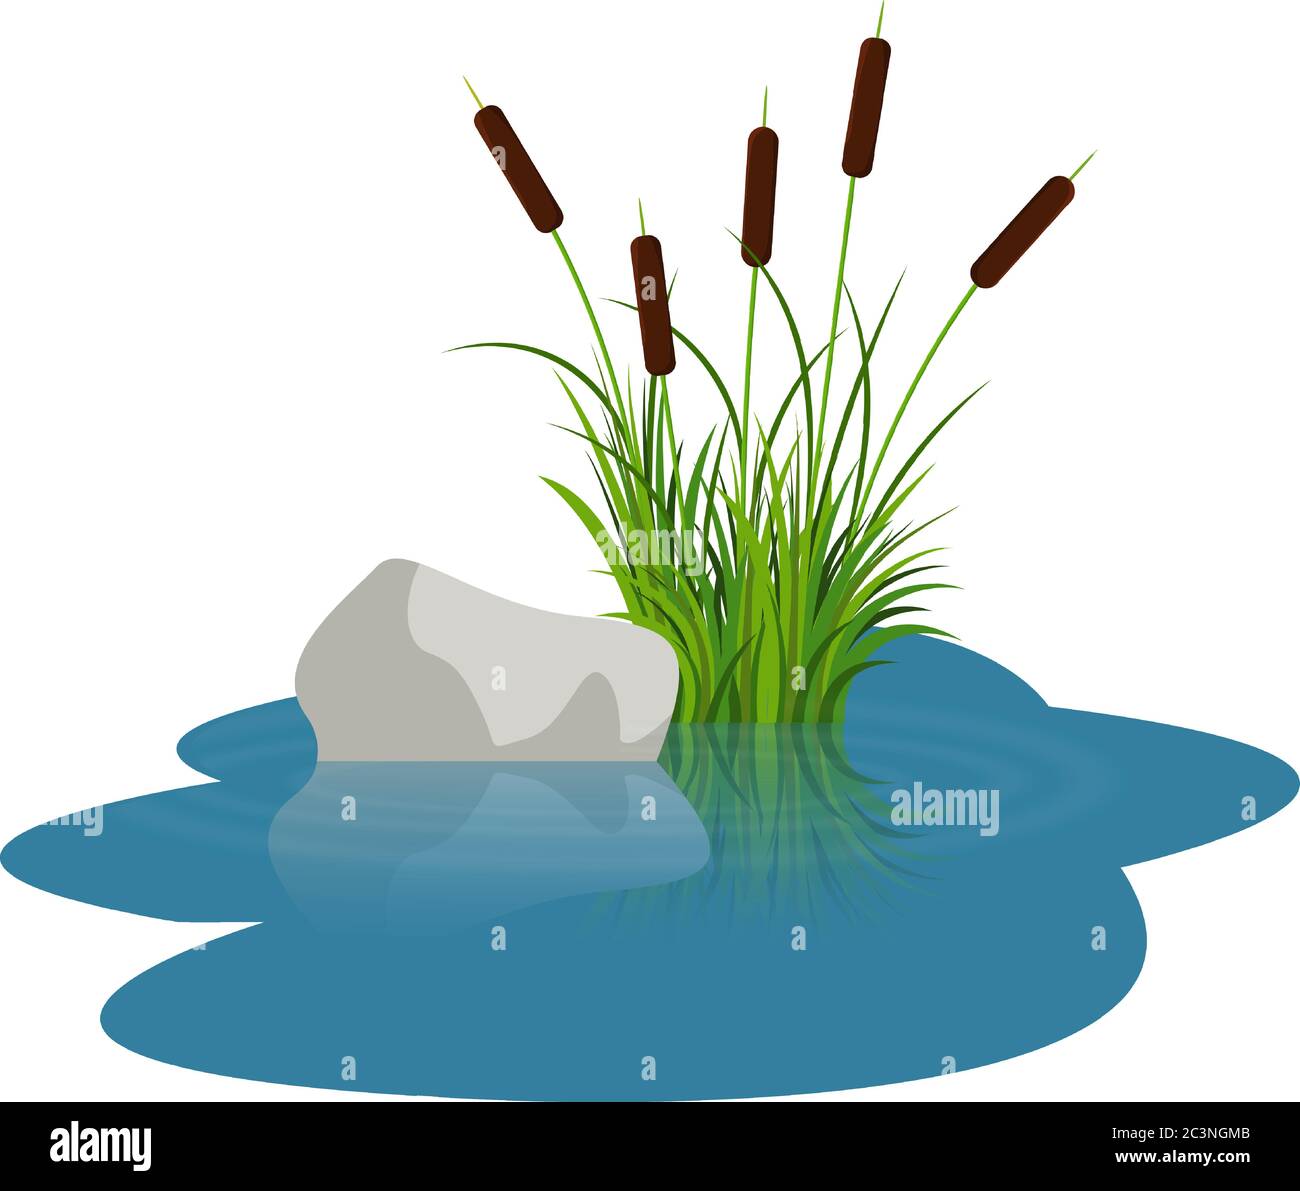 Bush reeds with stone on the water. Reeds stern and grey stone reflected in the lake water with water rounds. Bush reeds and stone vector on the water Stock Vector